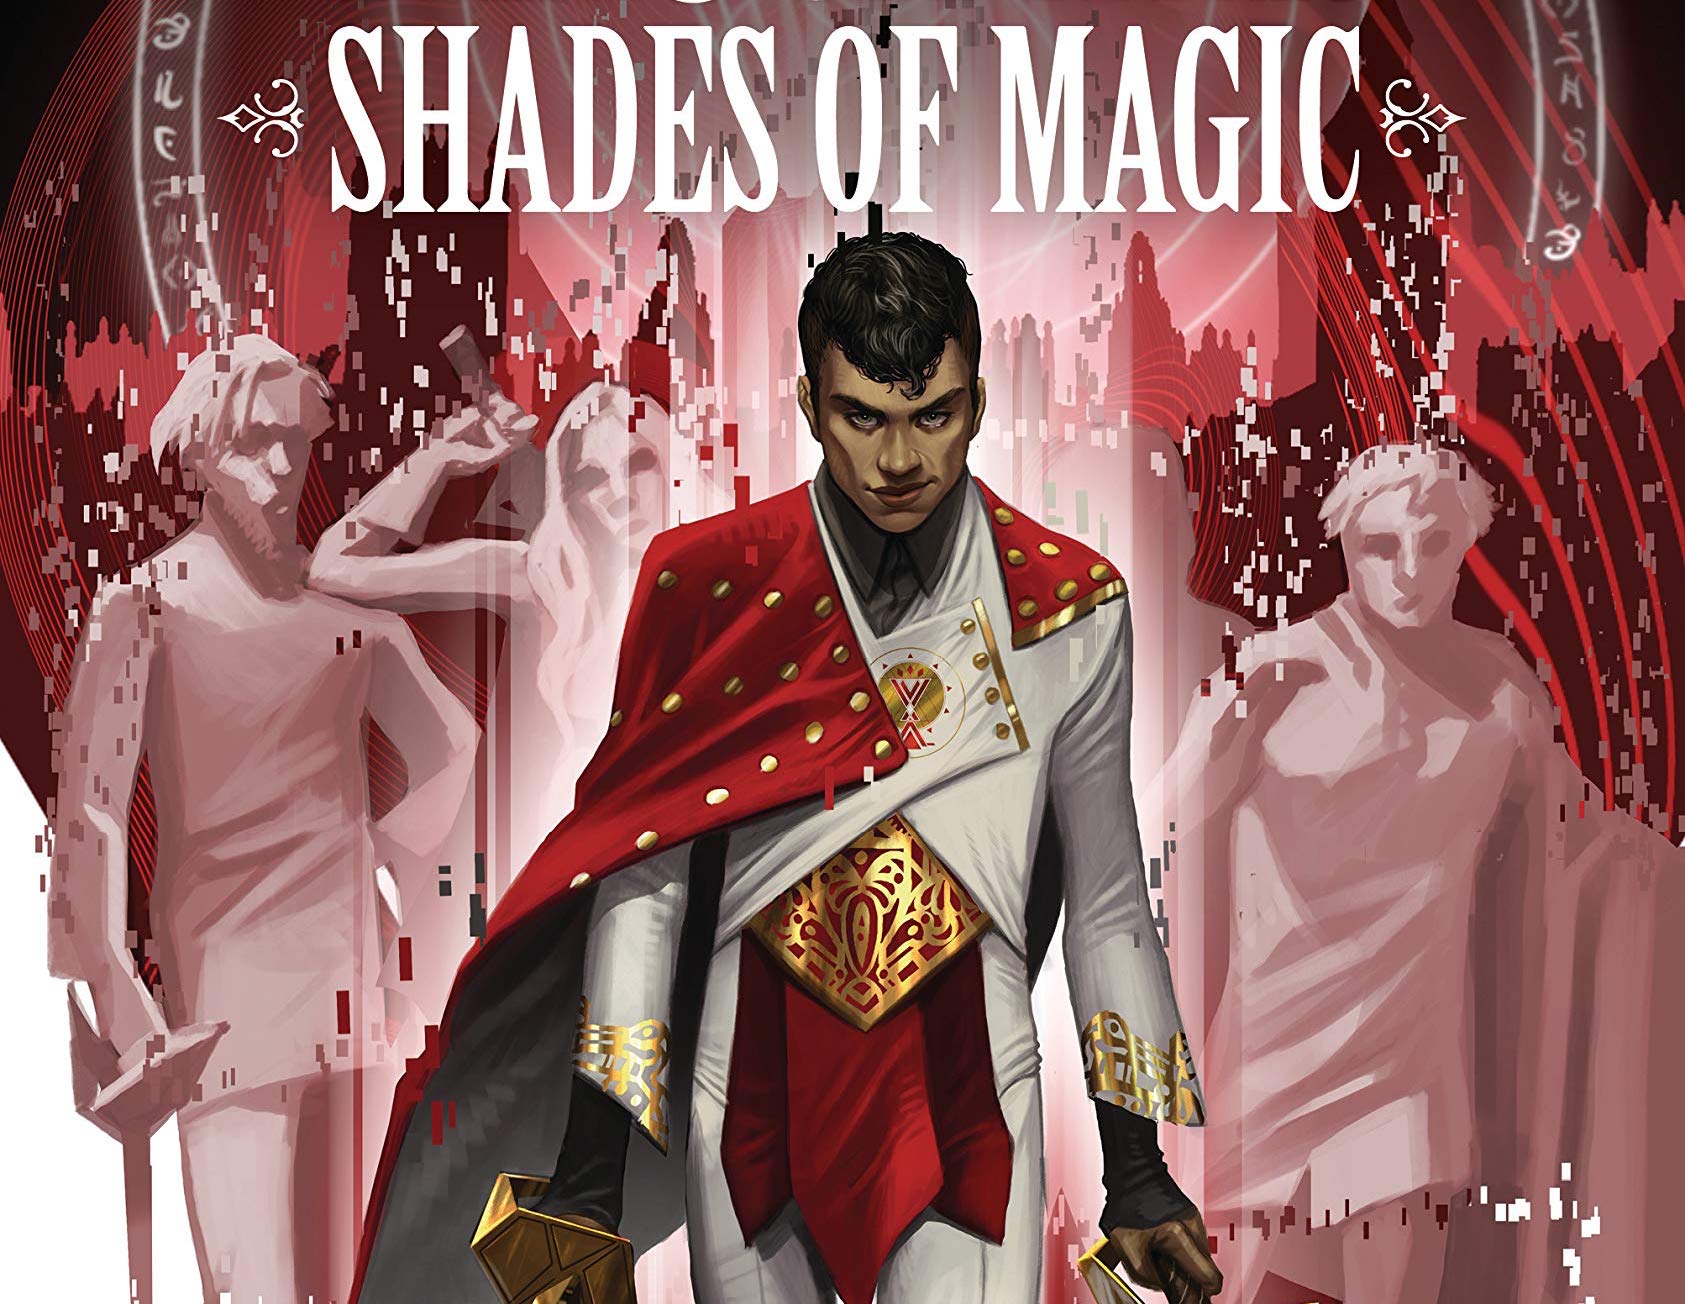 EXCLUSIVE 'Shades of Magic' creator commentary with artist Andrea Olimpieri